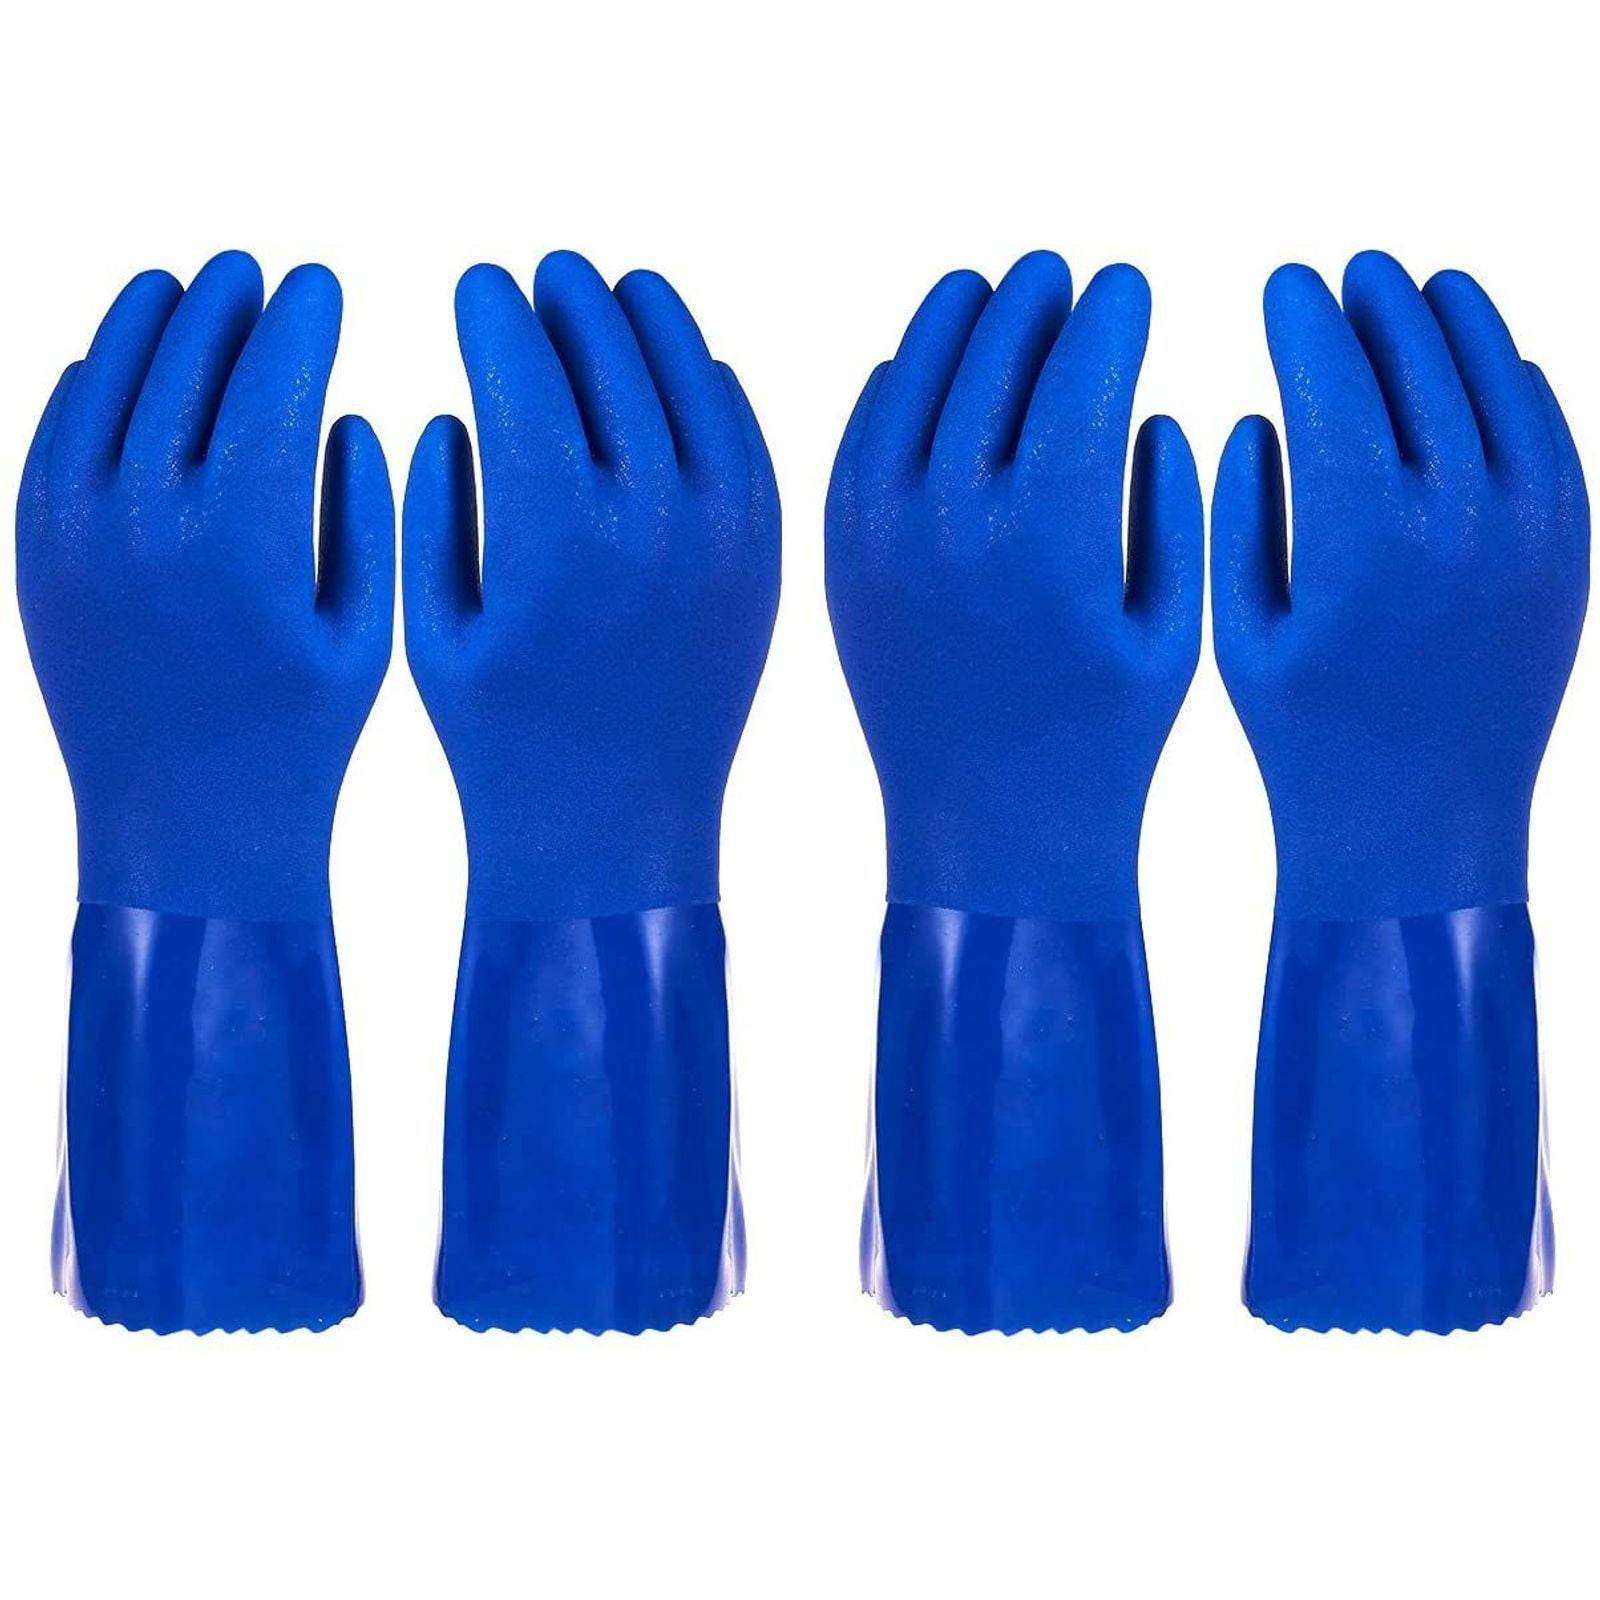 Household Rubber Cleaning Gloves,Latex Cotton Cleaning Gloves Long and Reusabl 